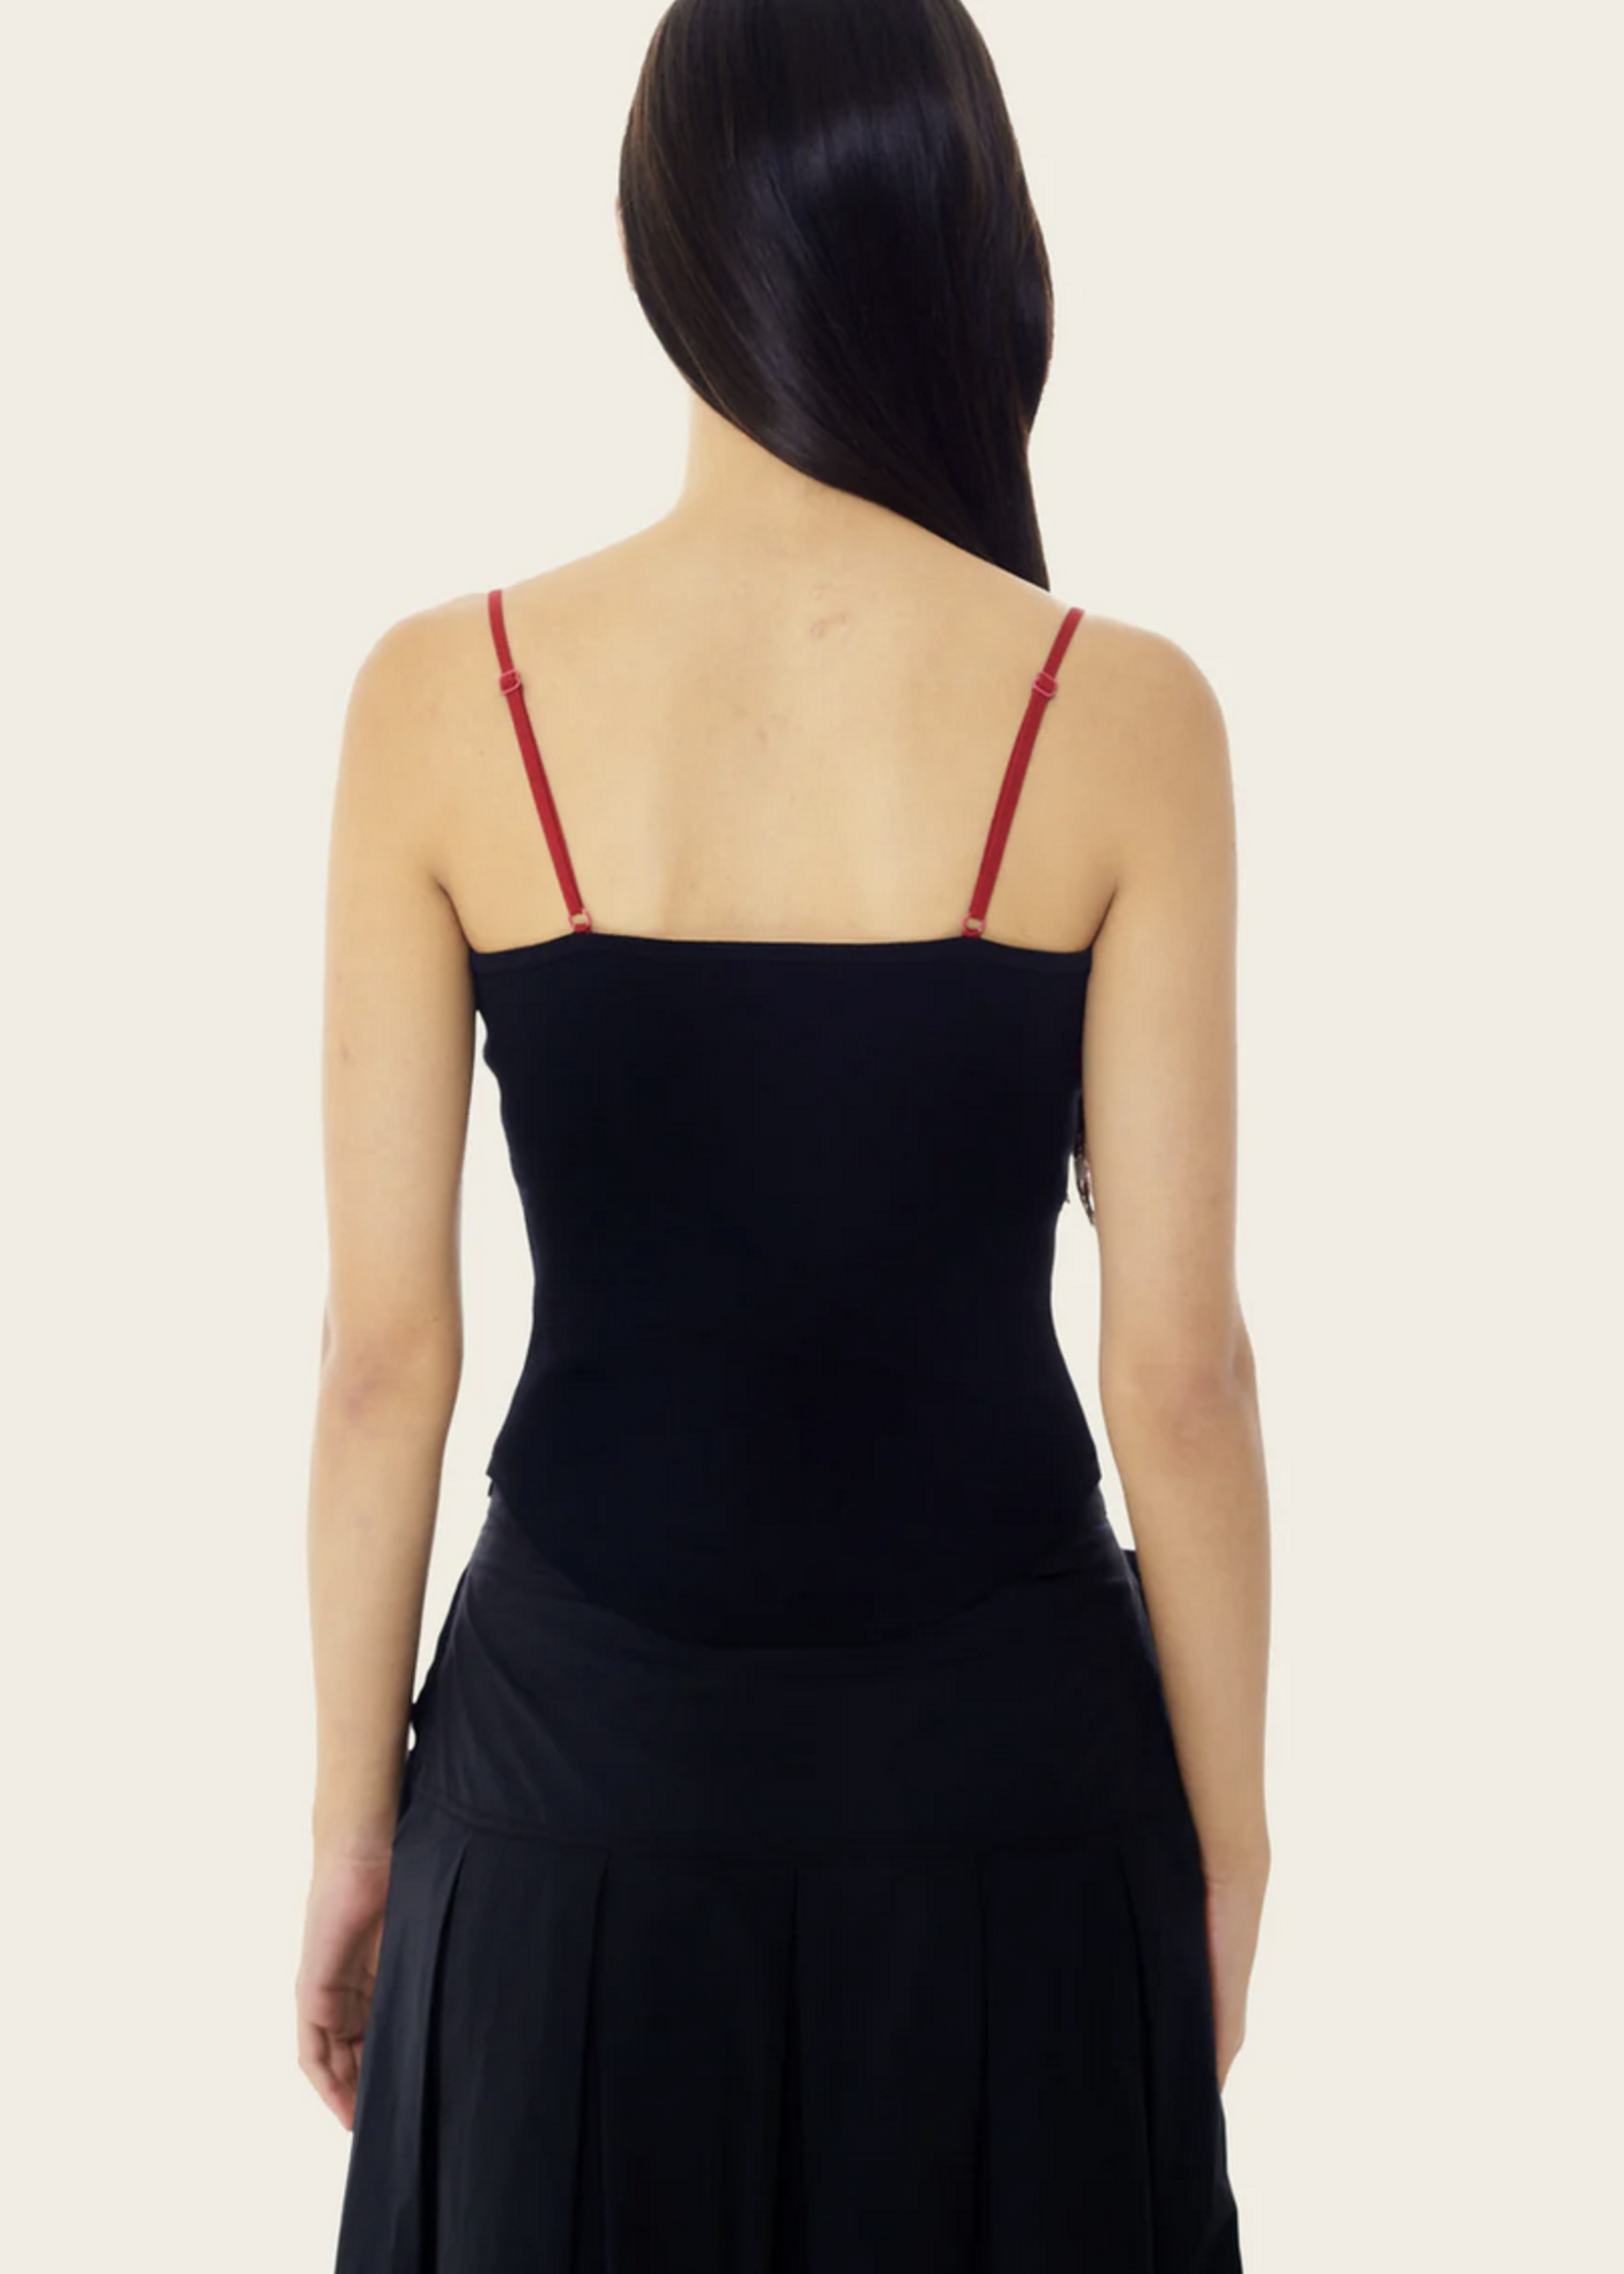 Find Me Now Persephone Corset Knit Tank